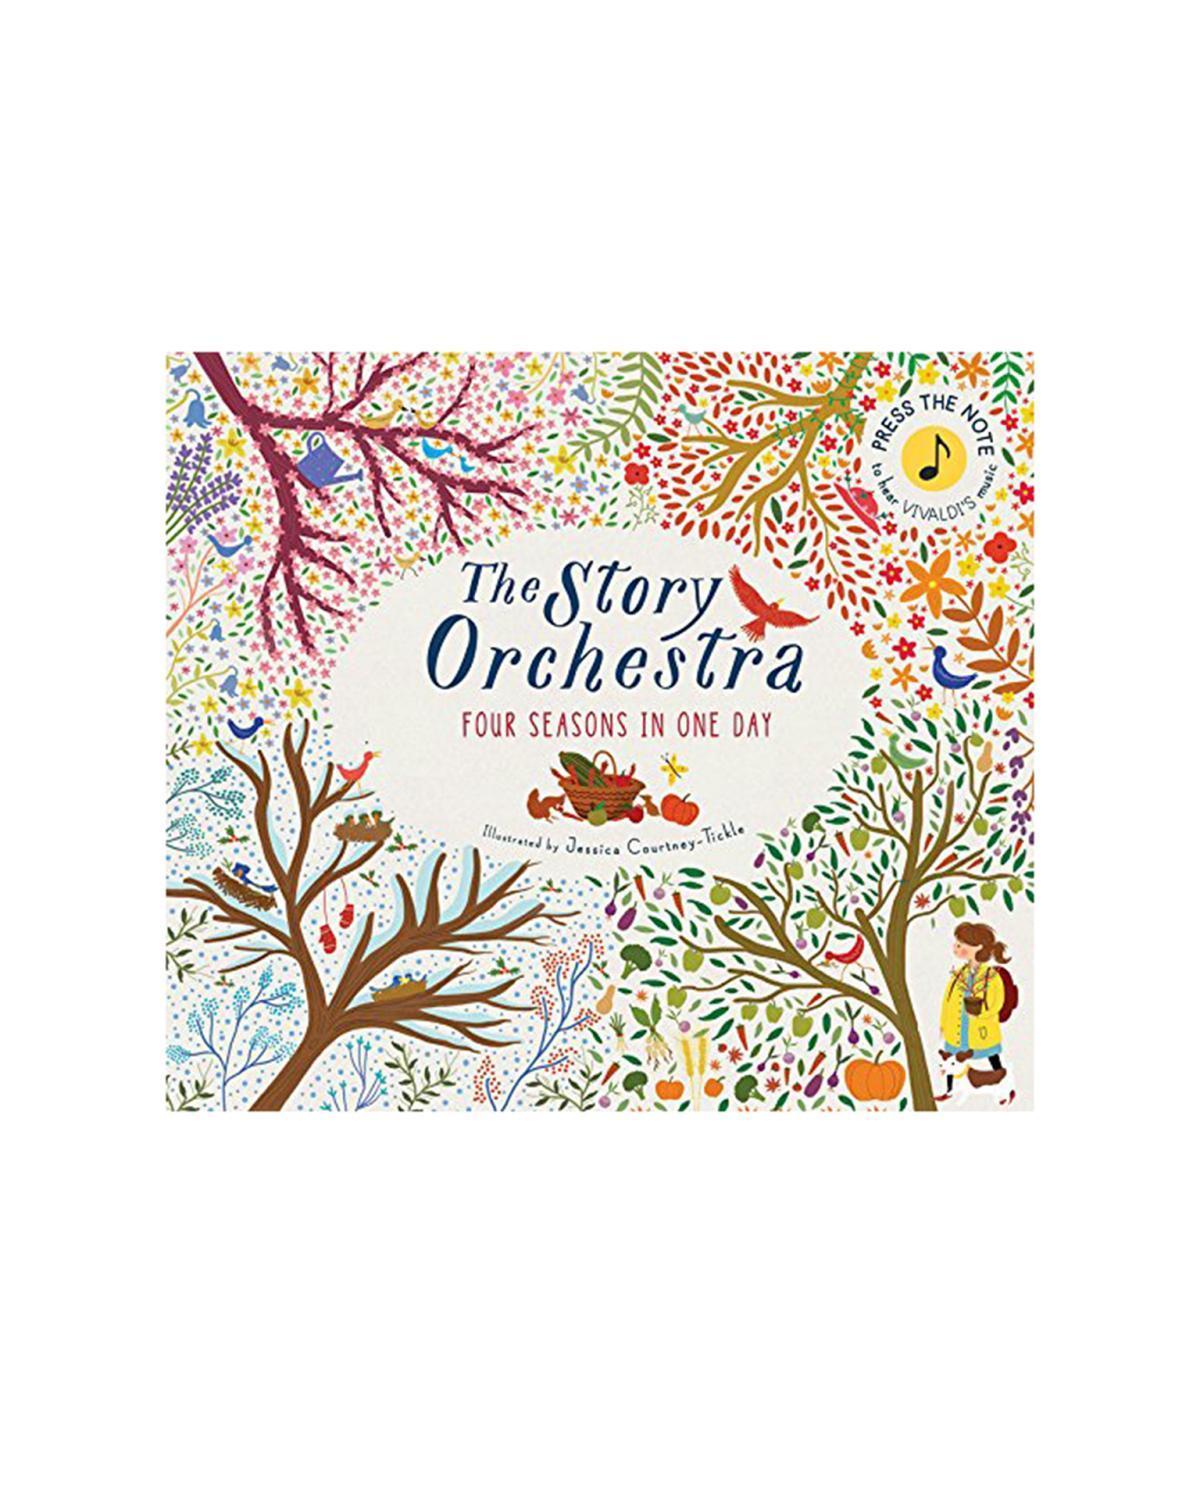 Little quarto publishing group play The Story Orchestra: Four Seasons in One Day